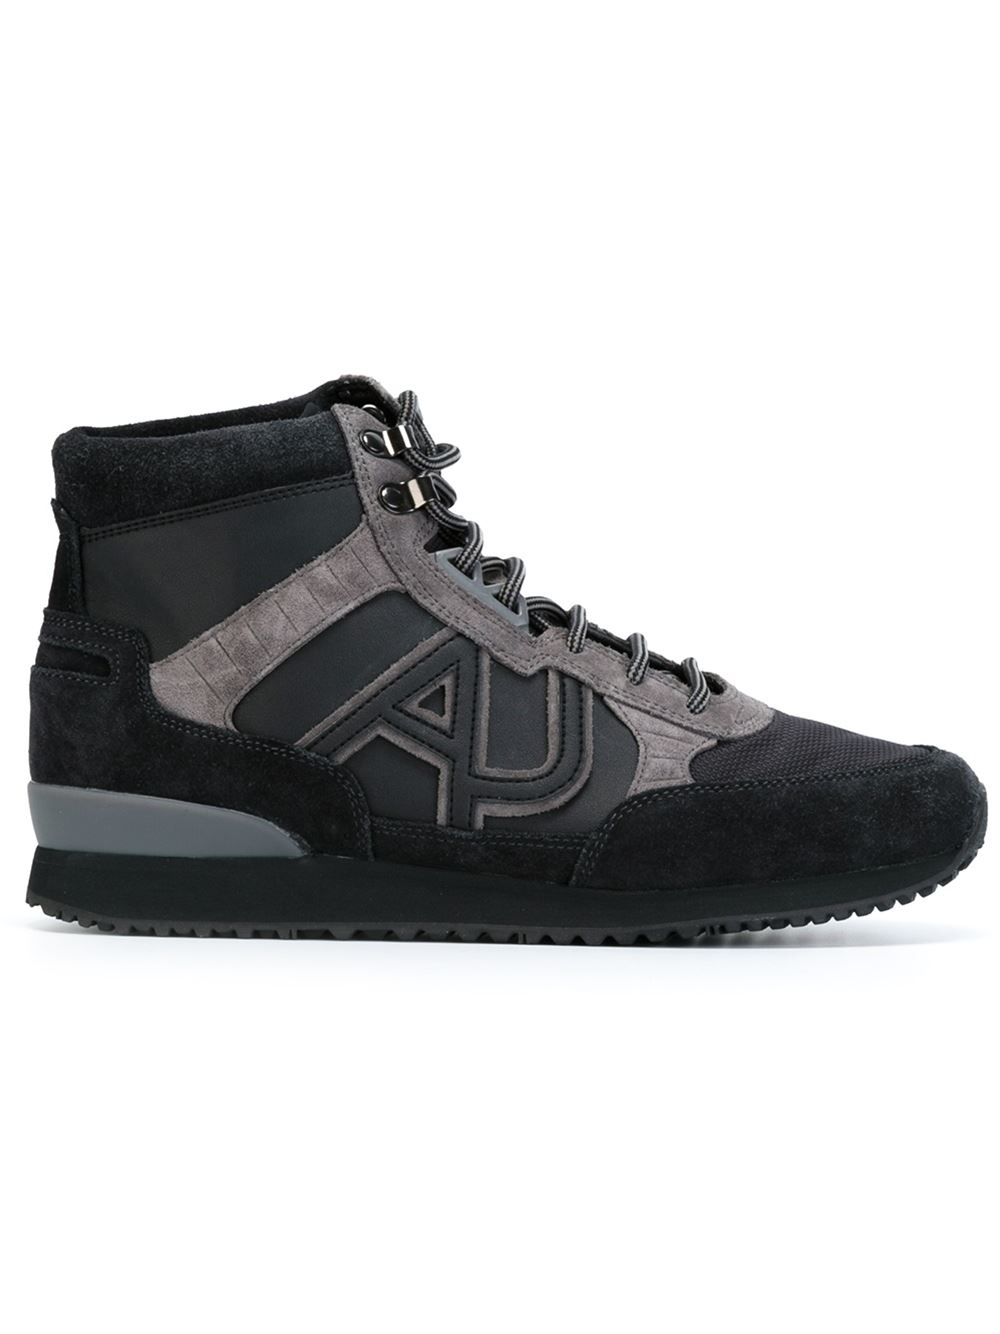 armani jeans high top sneakers